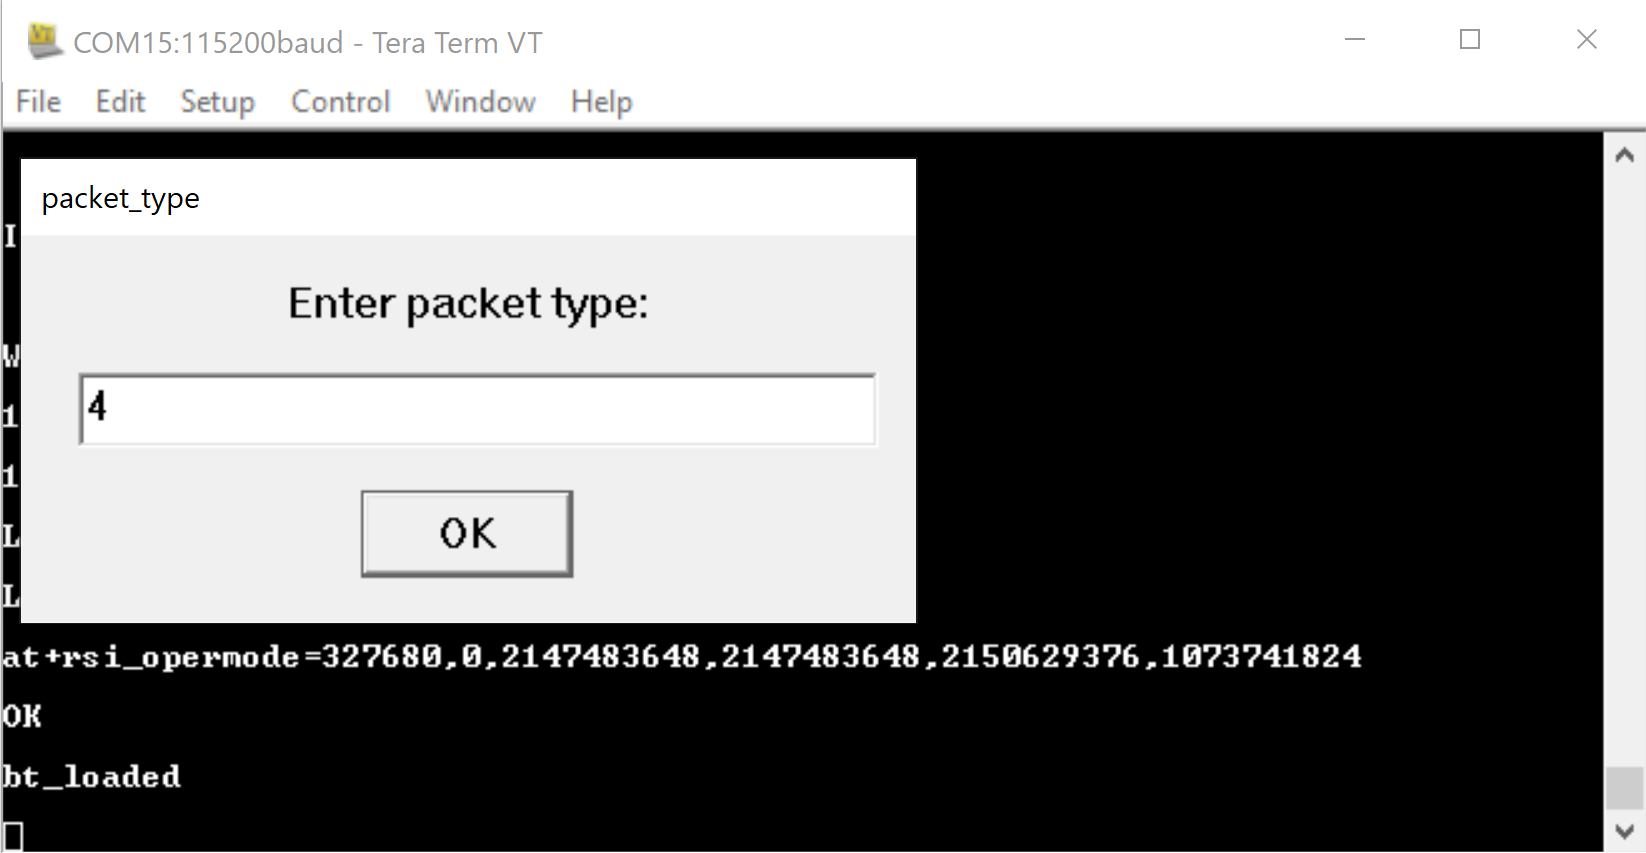 Packet type